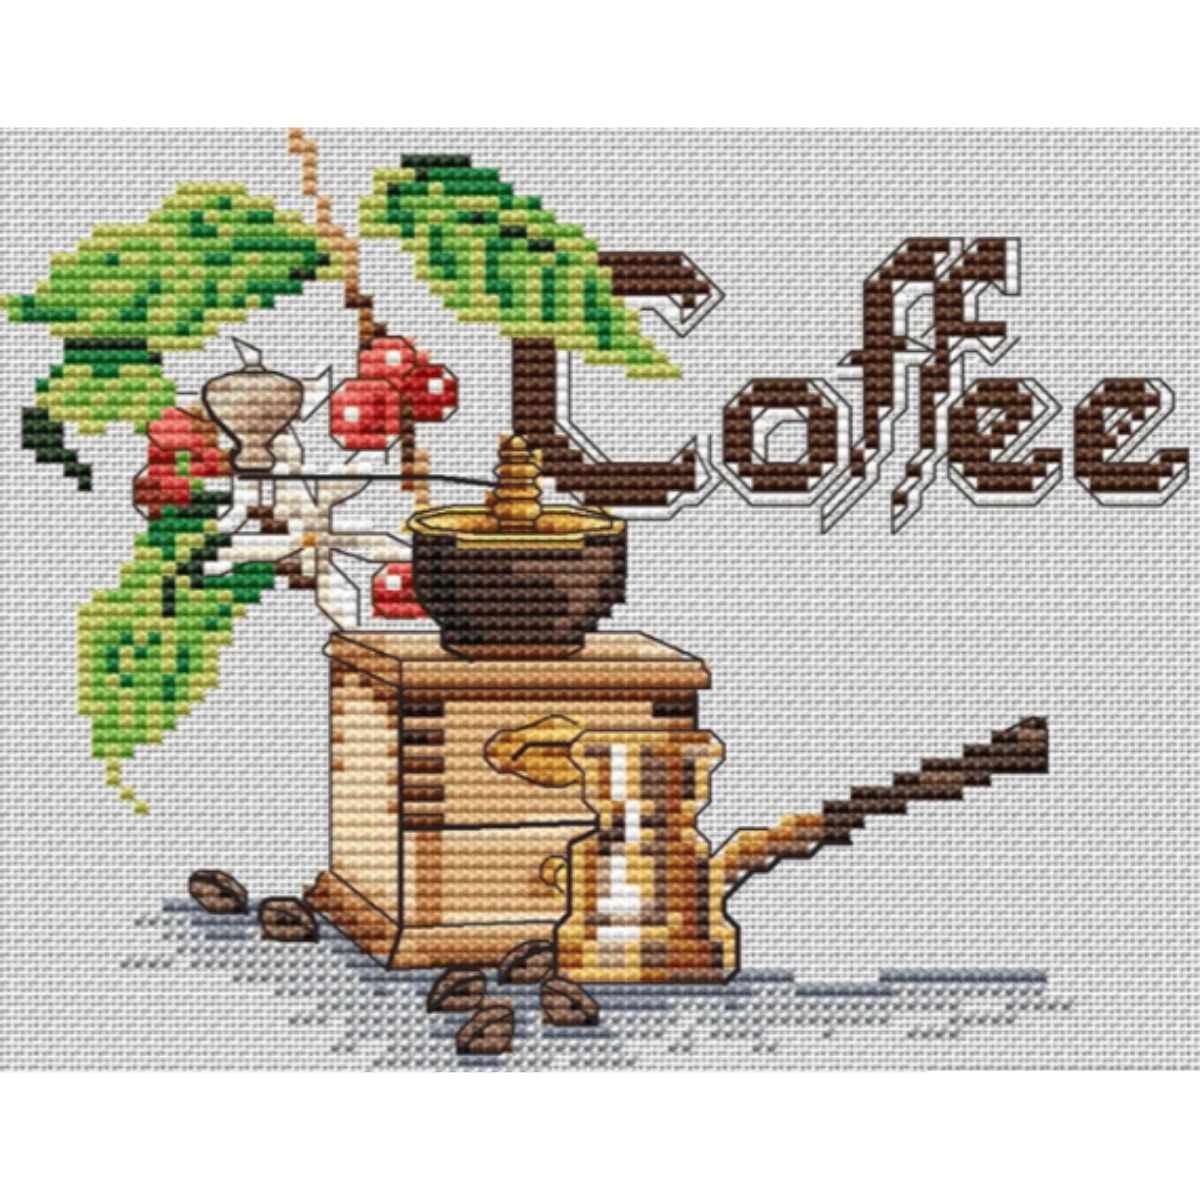 coffee cross stitch pattern with beans and grinder